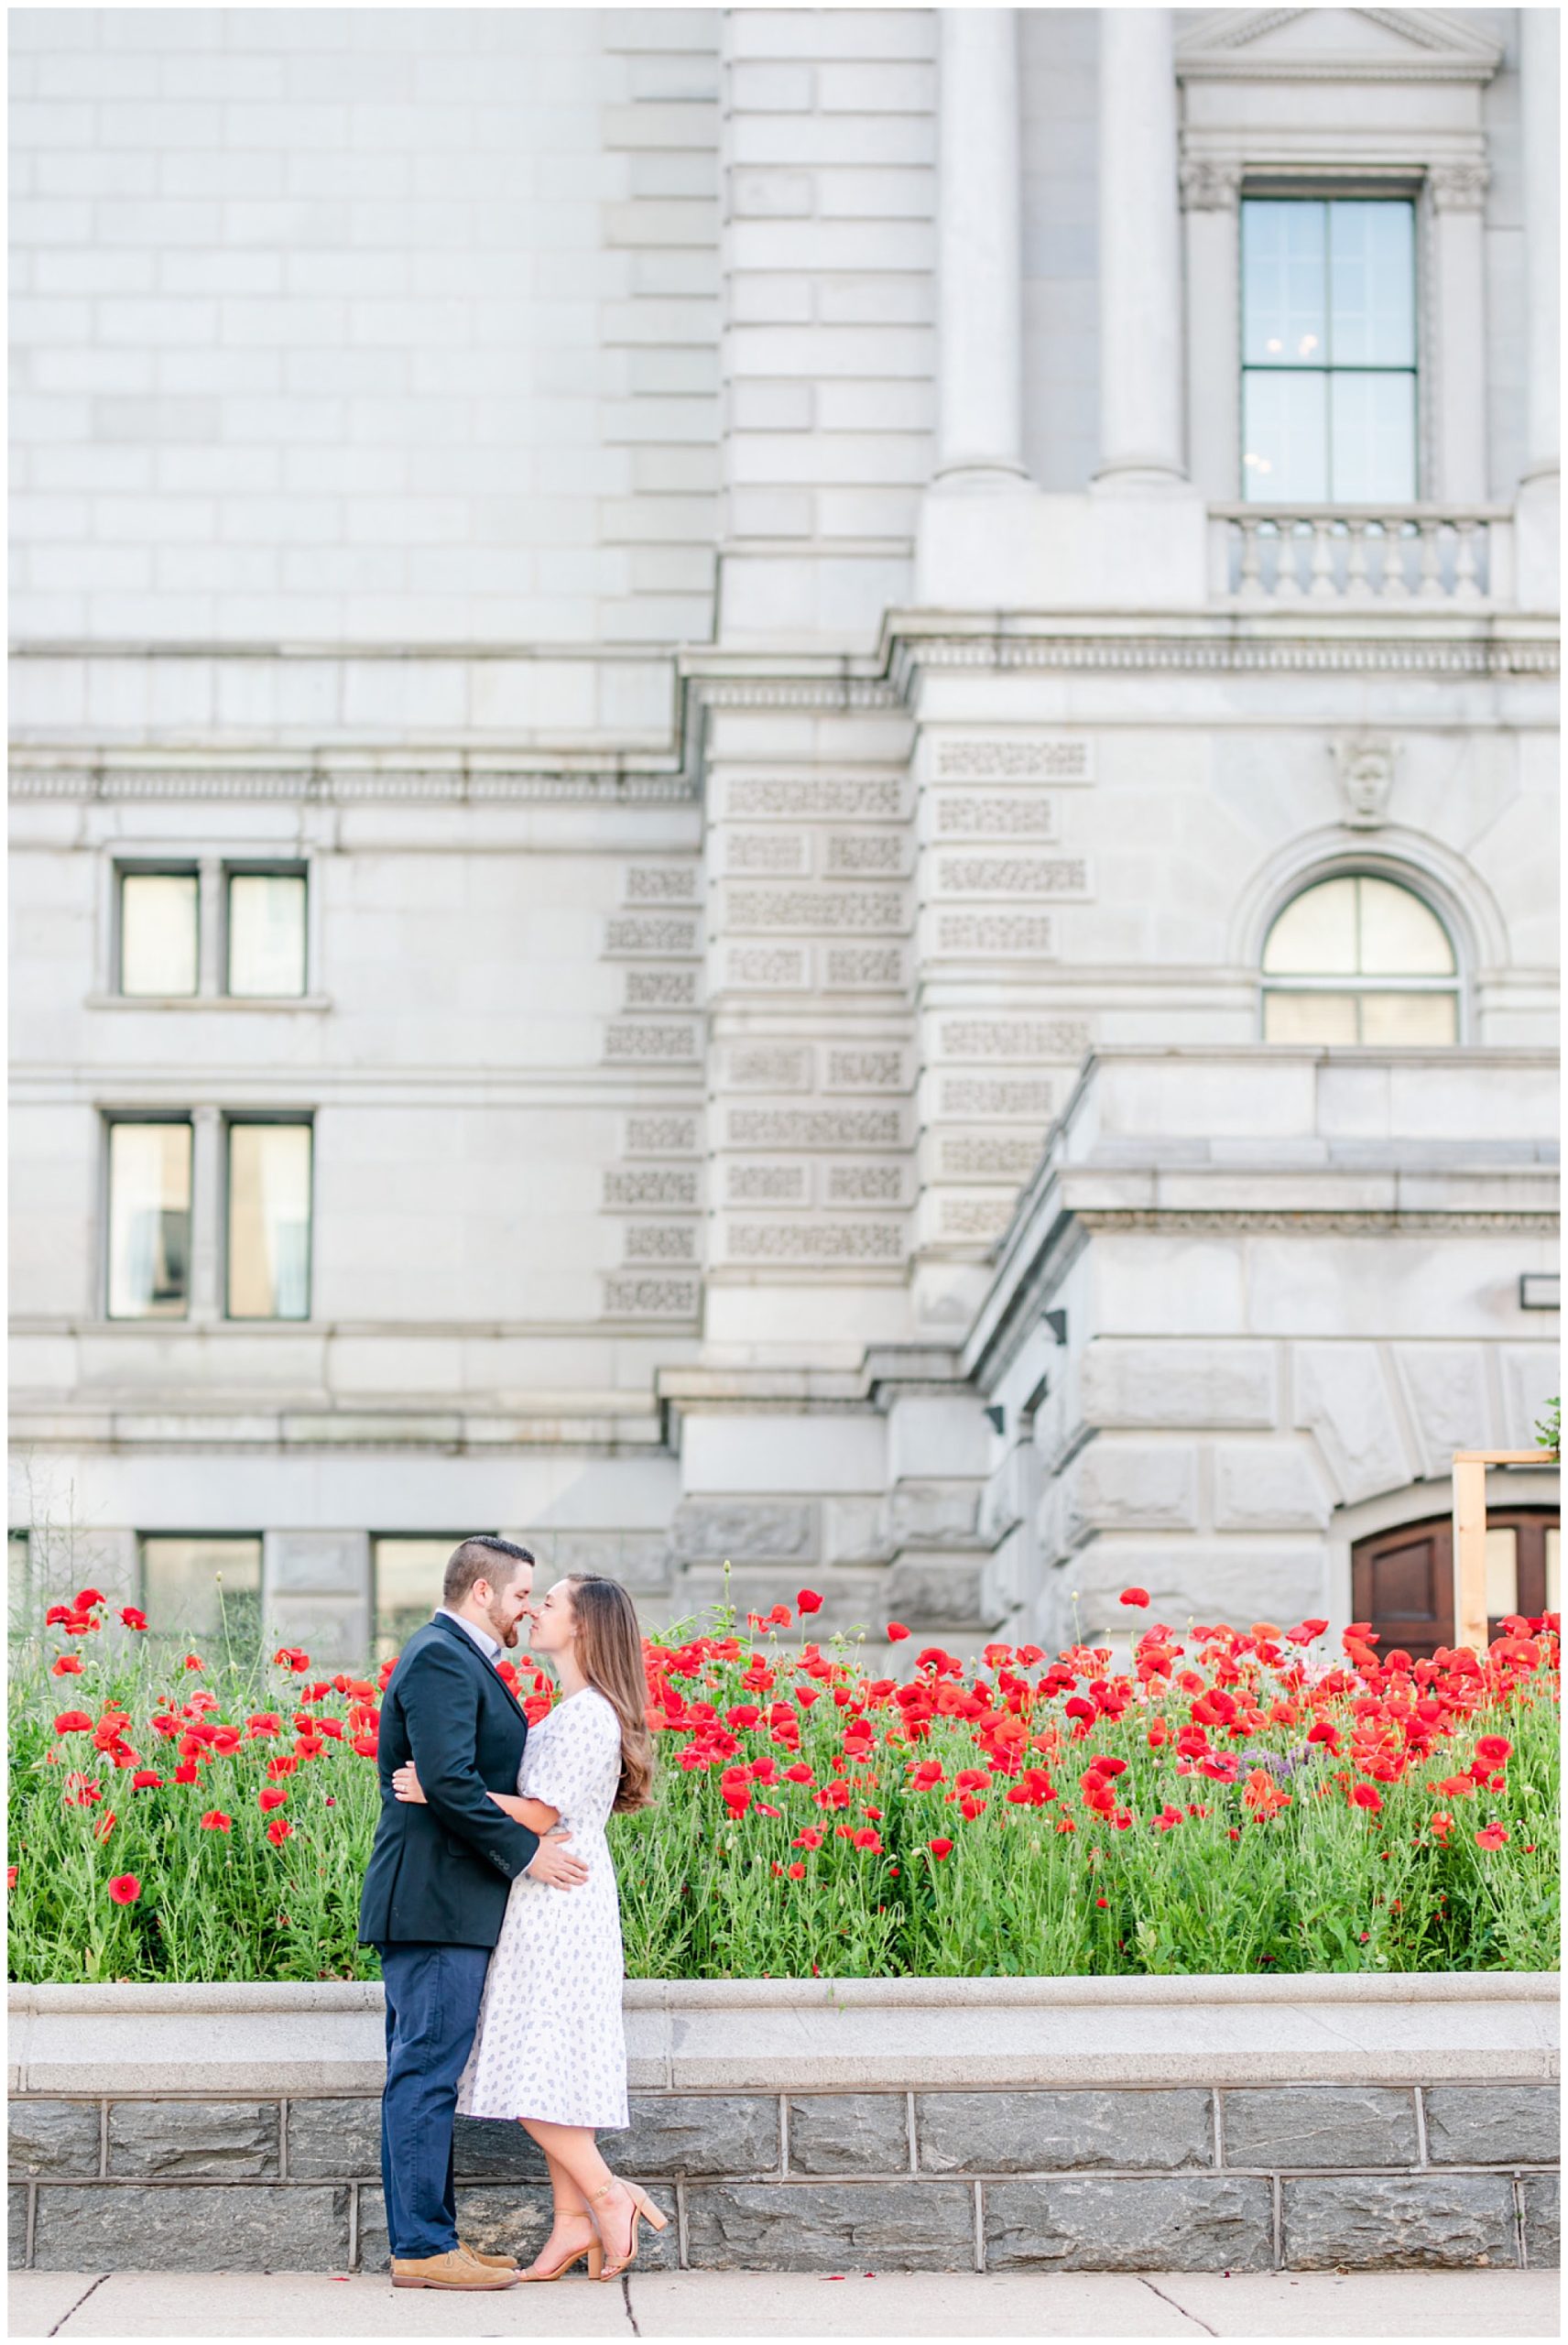 Capitol Hill engagement session, Capitol Hill portraits, D.C. engagement photography, D.C. engagement photographer, D.C. Capitol Hill D.C., DC photography, engagement photography, Rachel E.H. Photography, classic engagement photos, spring engagement photos, poppy season, Library of Congress